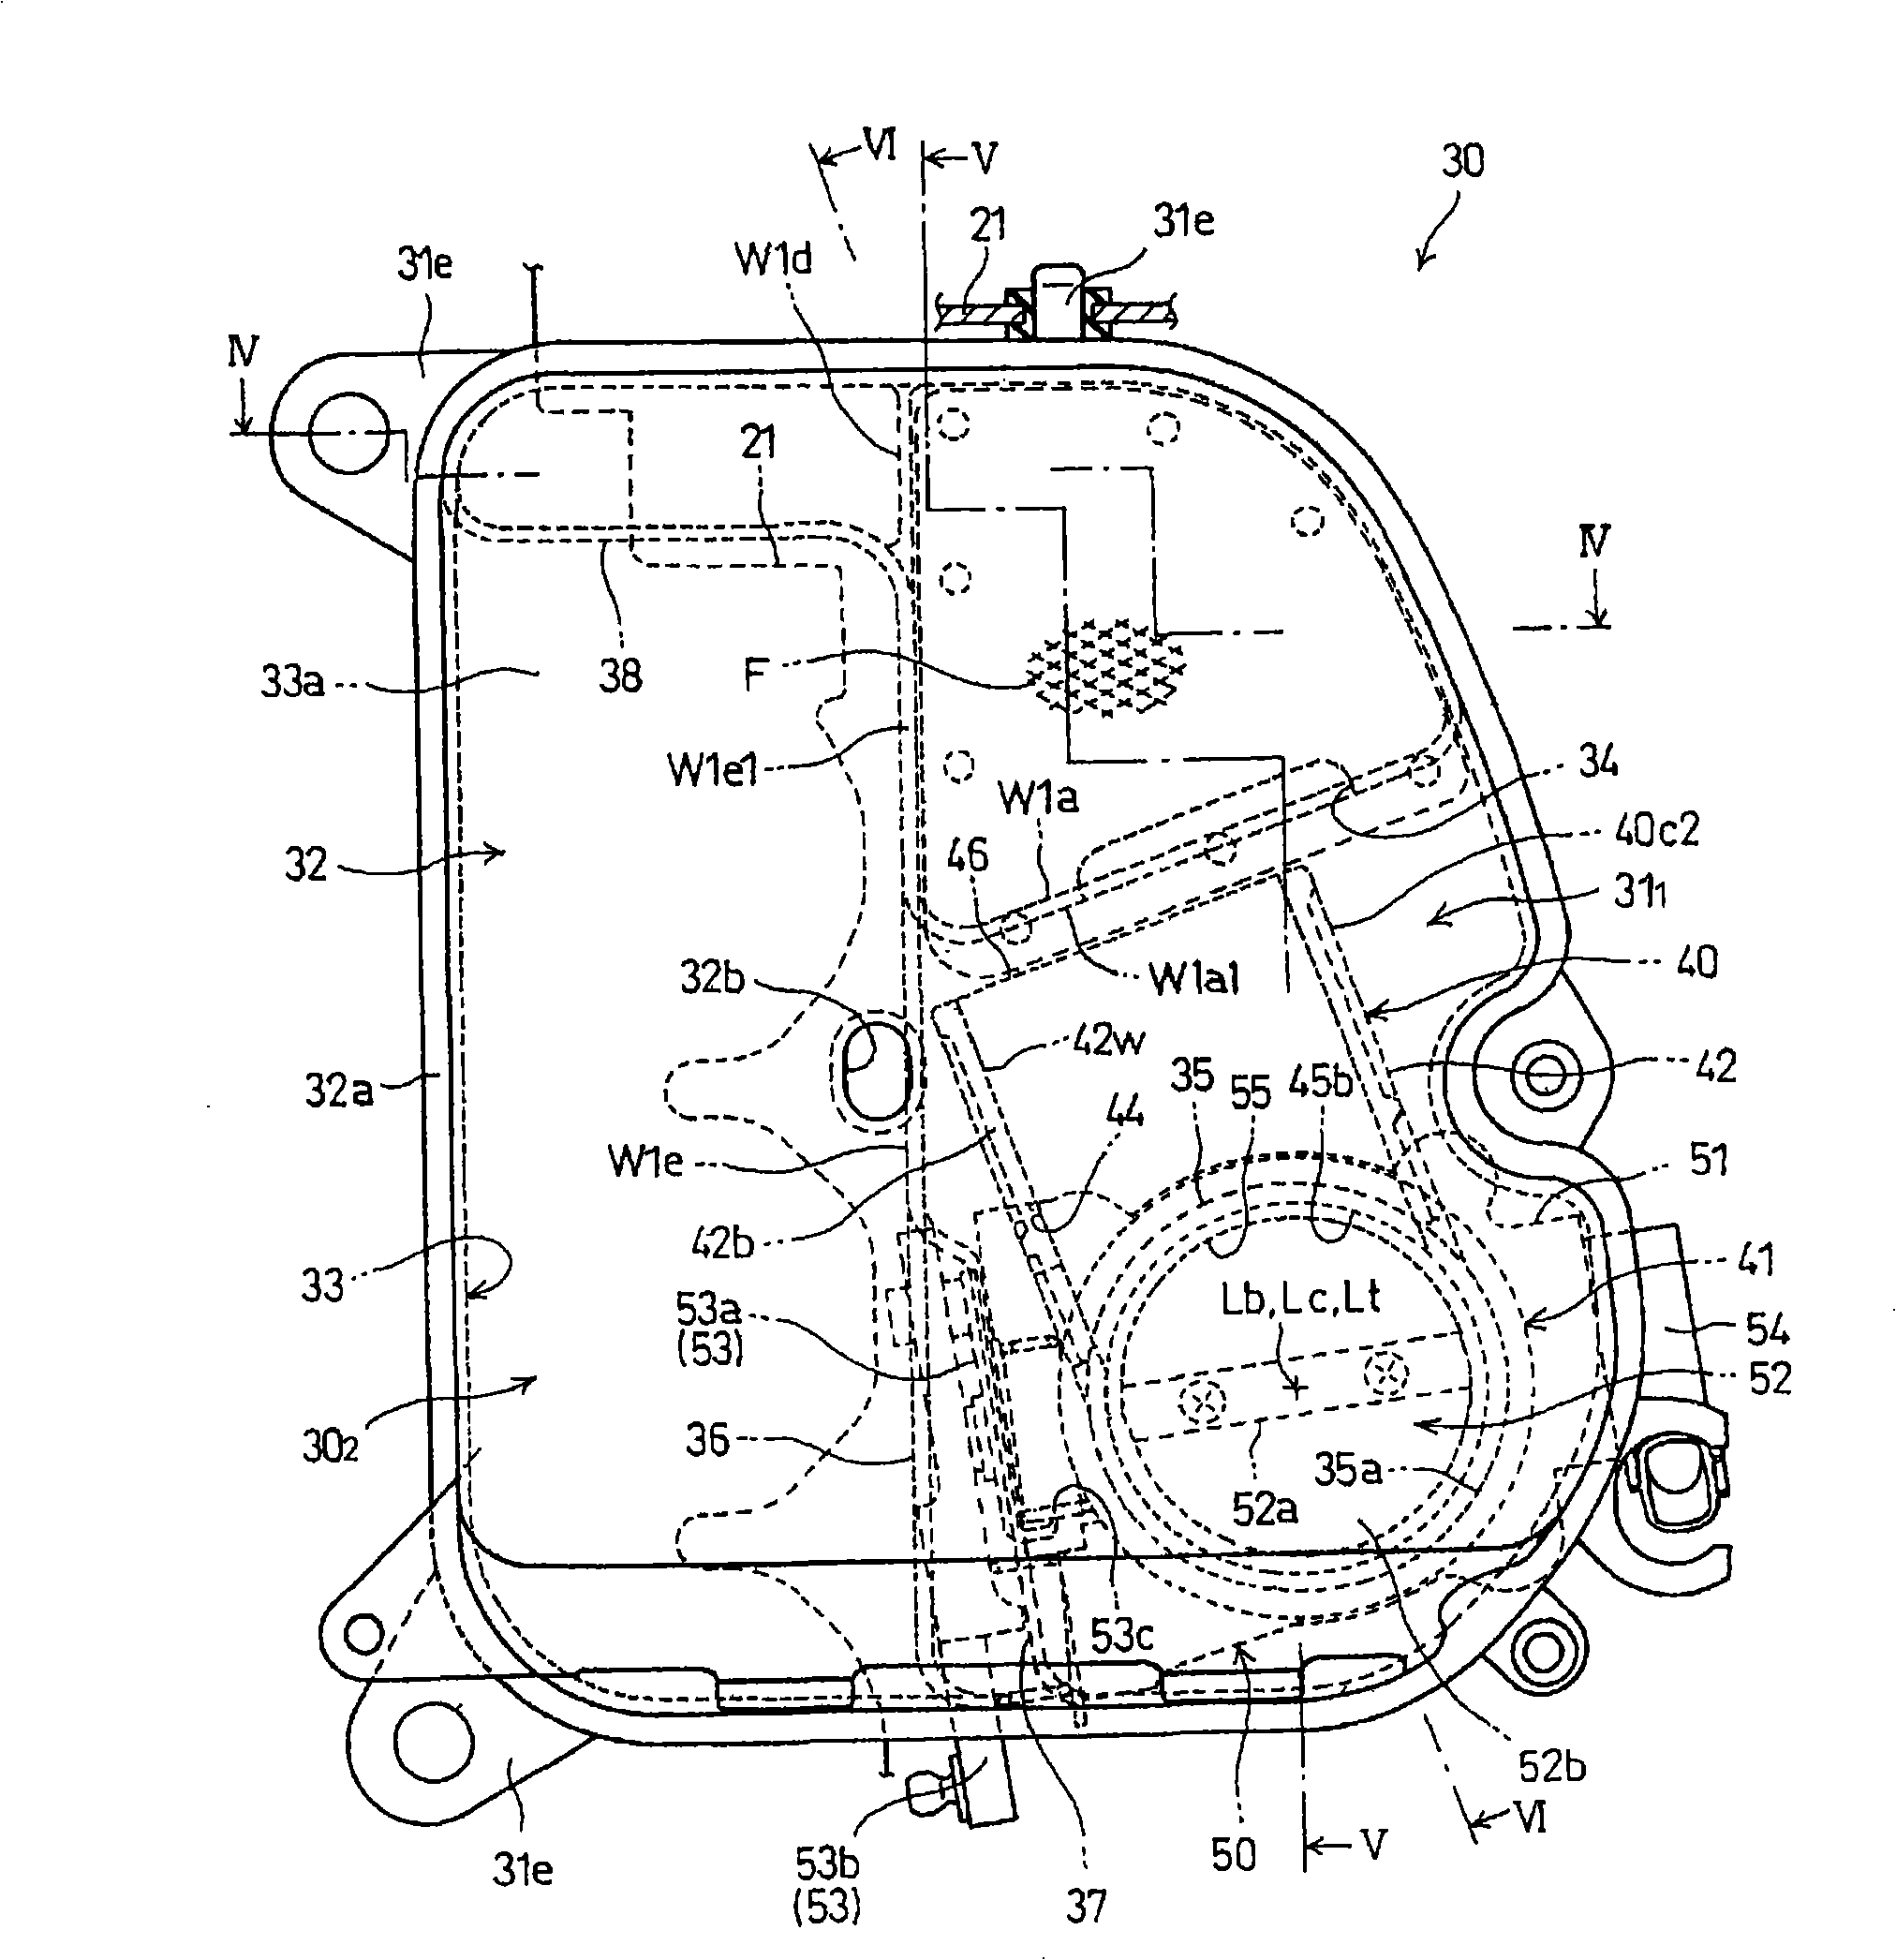 Internal combustion engine with intake muffler